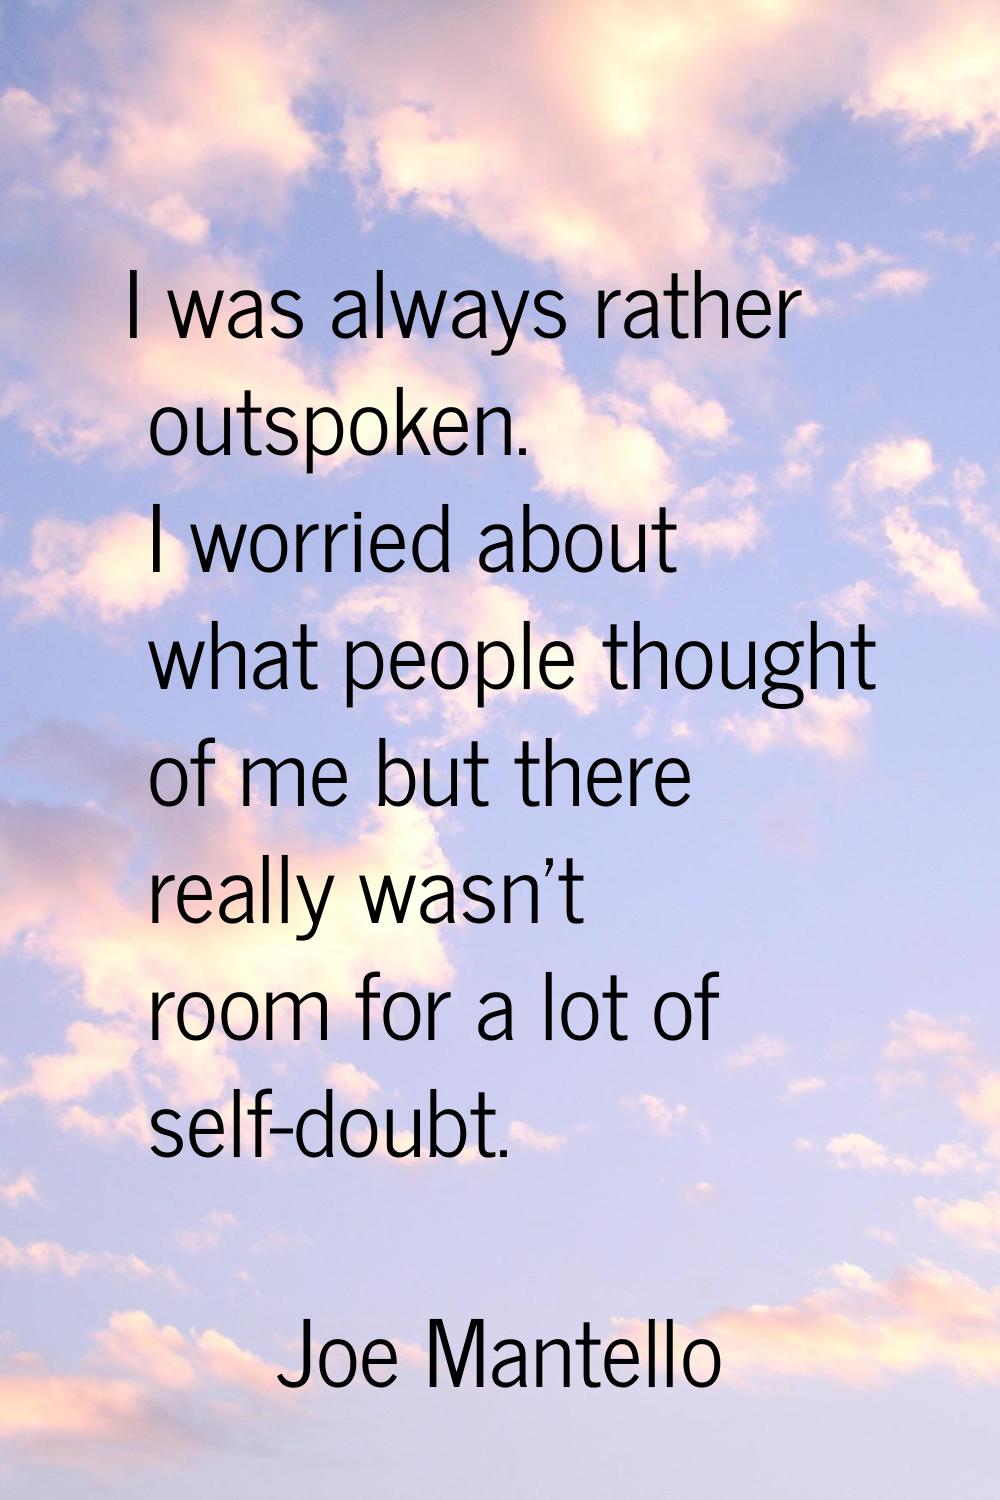 I was always rather outspoken. I worried about what people thought of me but there really wasn't ro